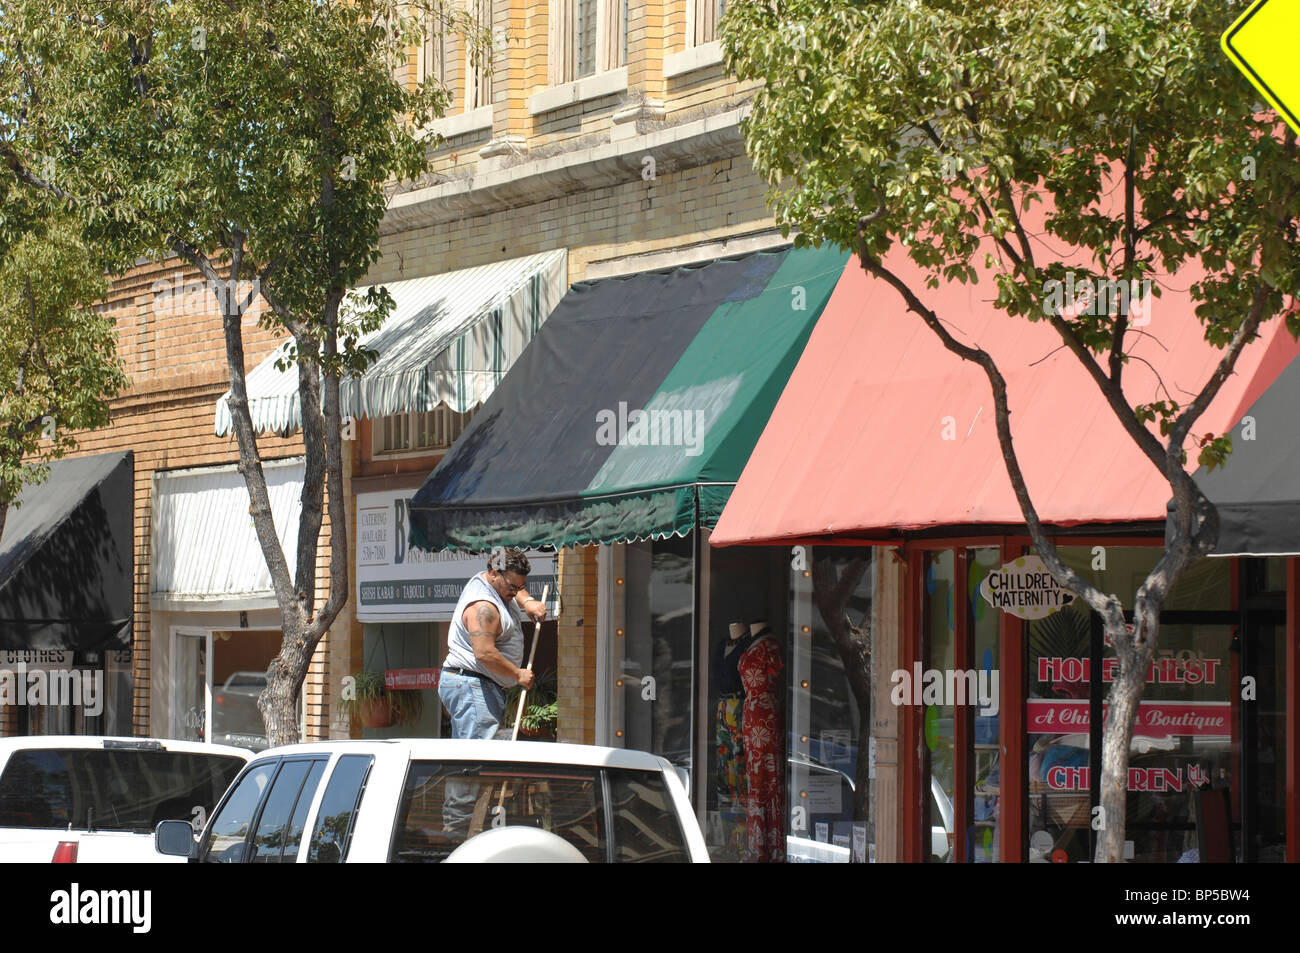 A man on a ladder painting a green awning over the storefront window. Stock Photo